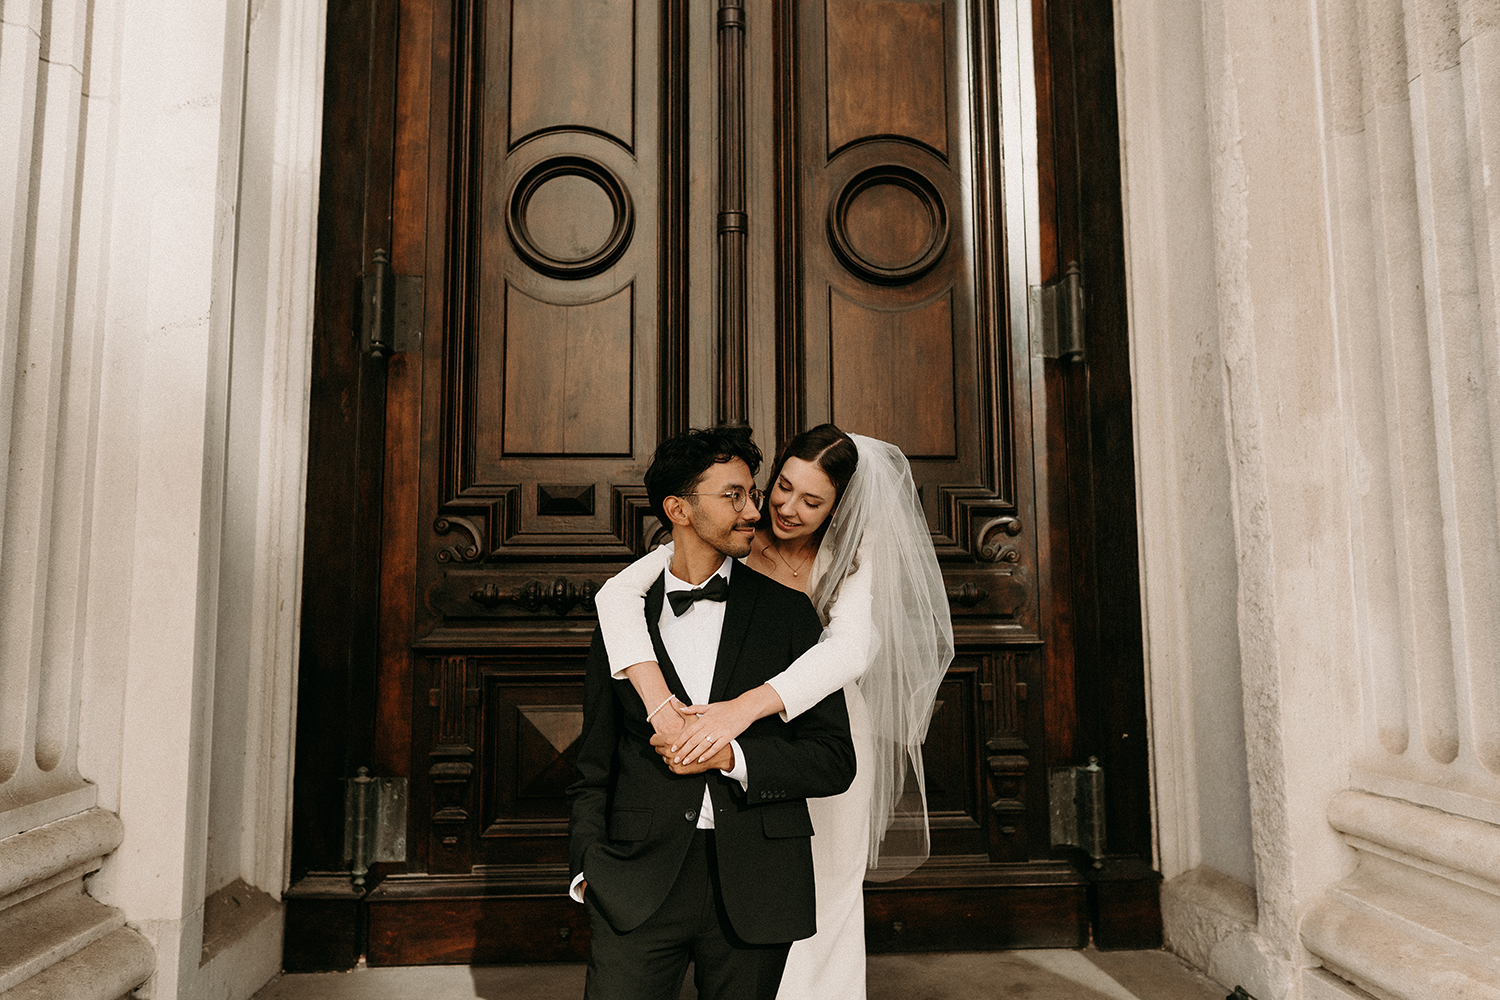 New York City Elopement. Couple in wedding attire hugging outside City Hall.